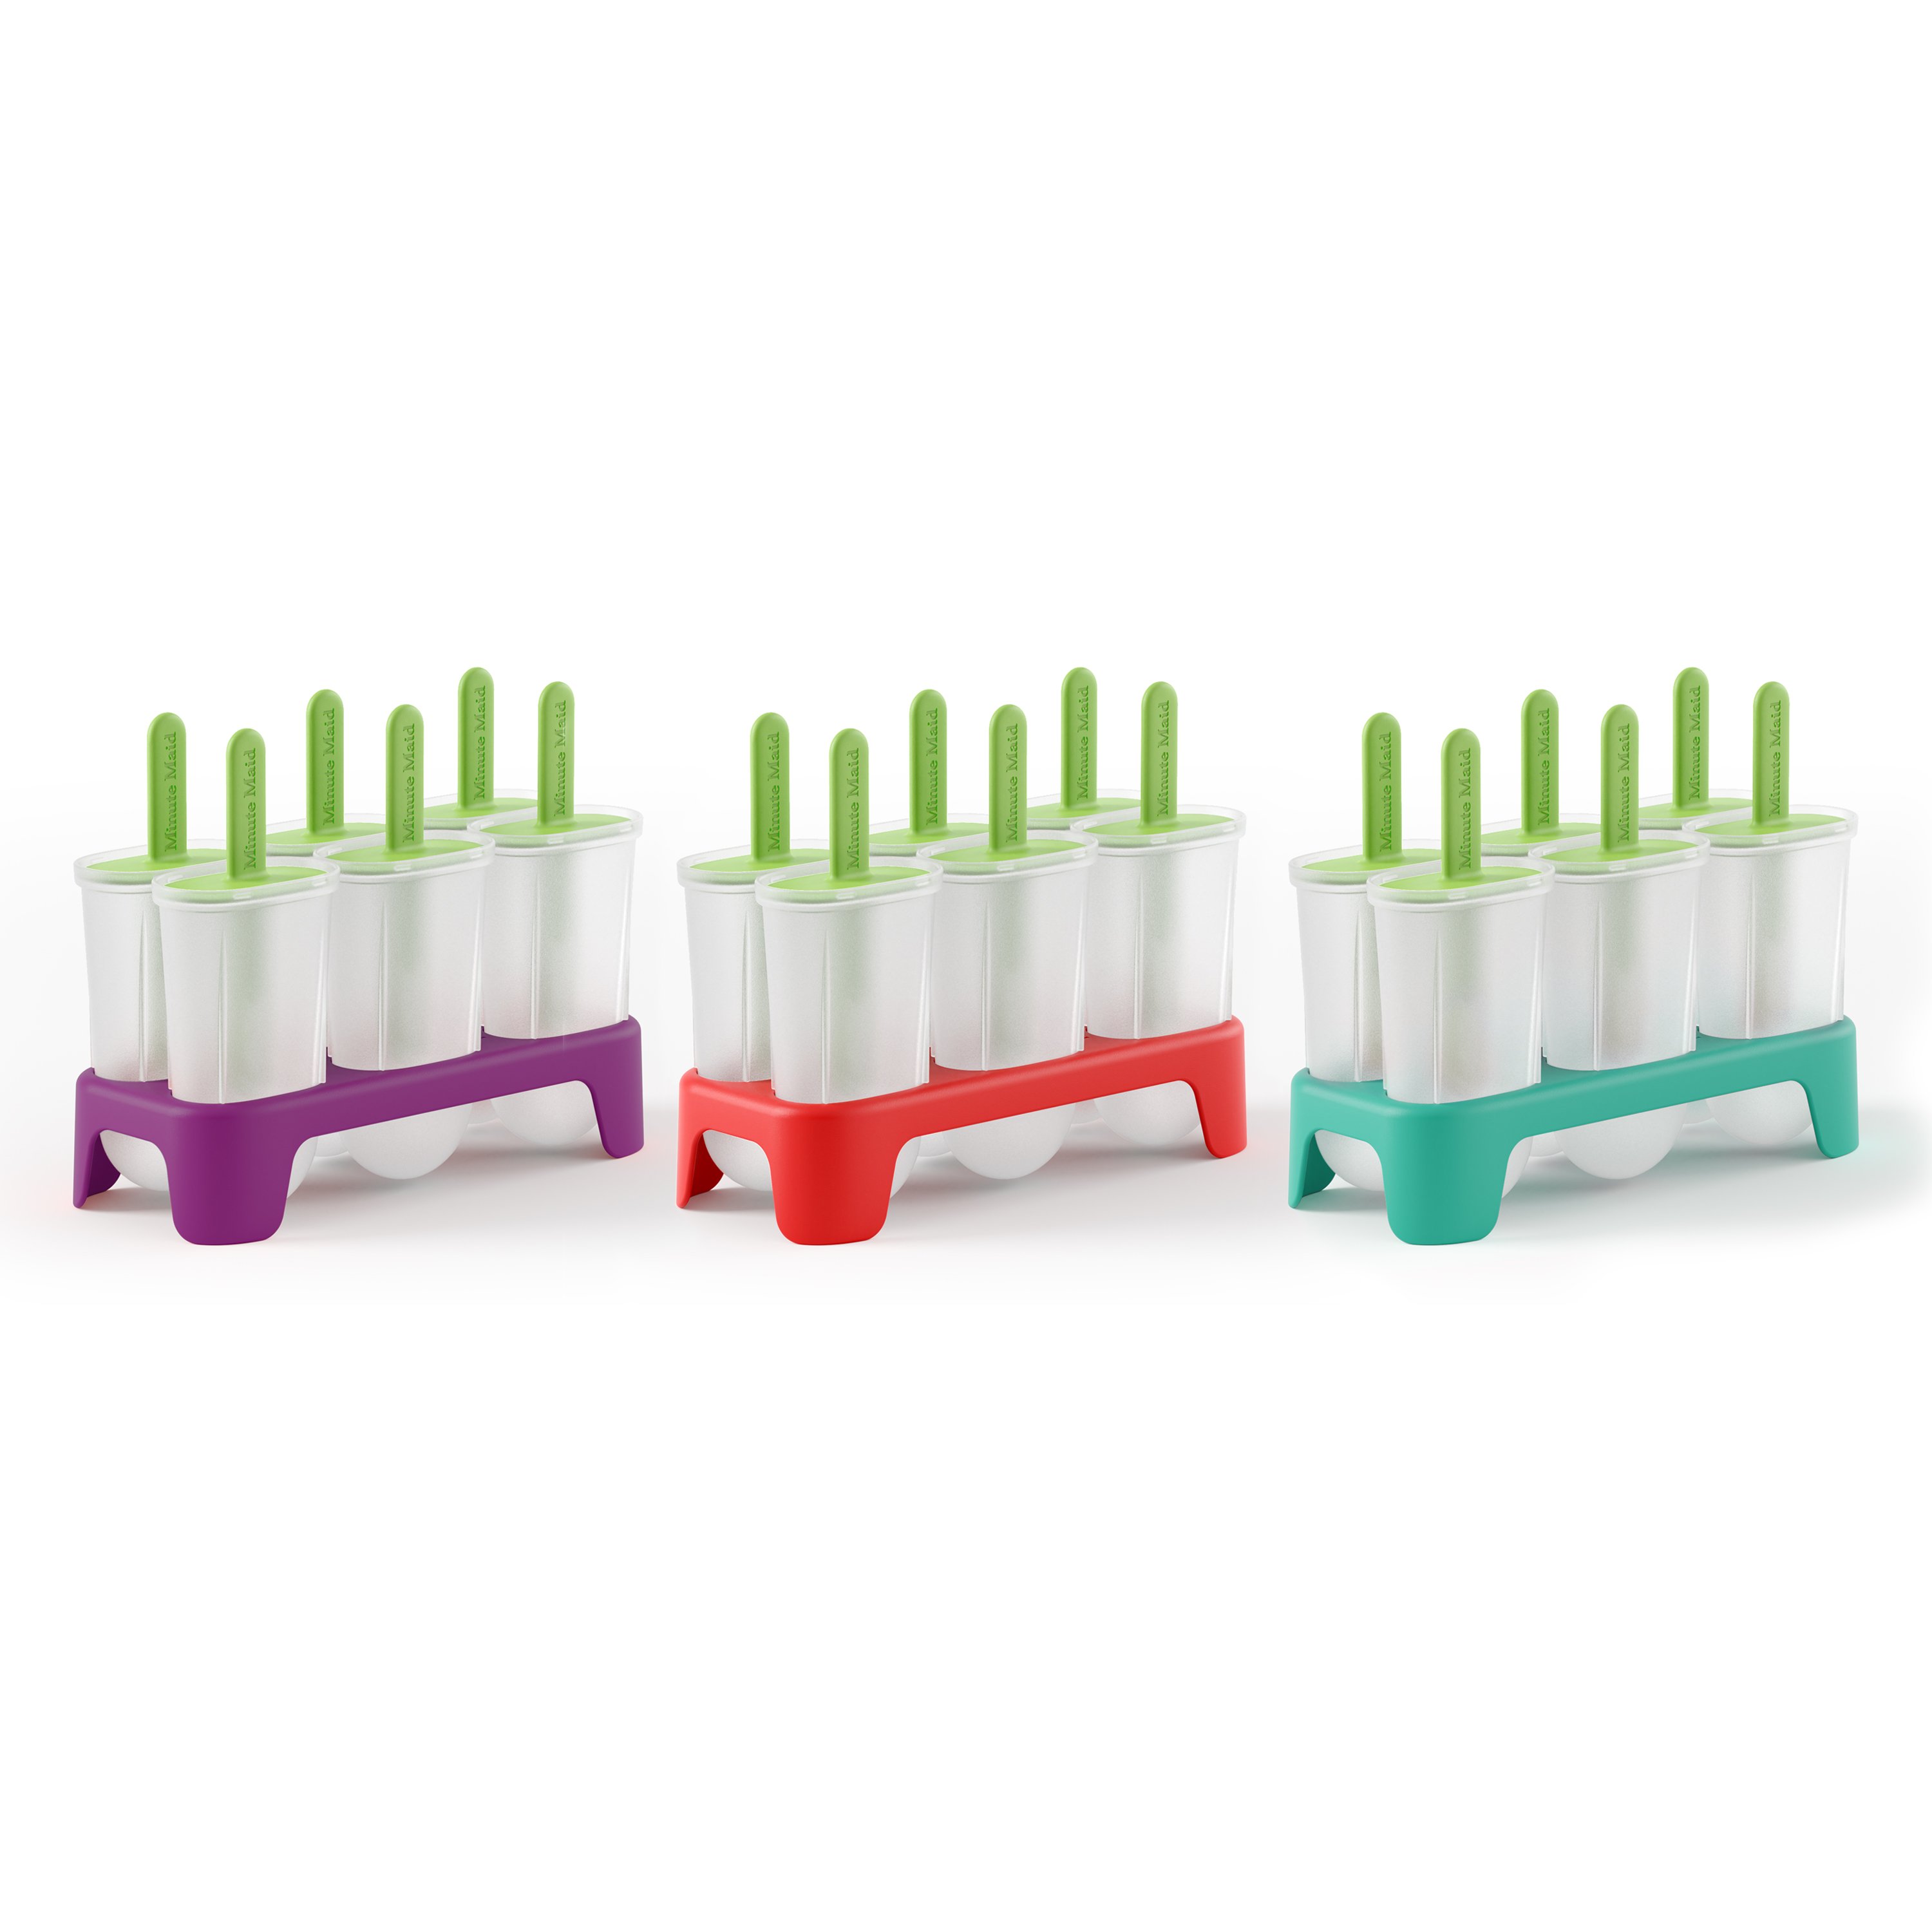 Minute Maid Set of 3 Ice Pop Molds - 1 Red, 1 Teal, 1 Purple - image 1 of 8